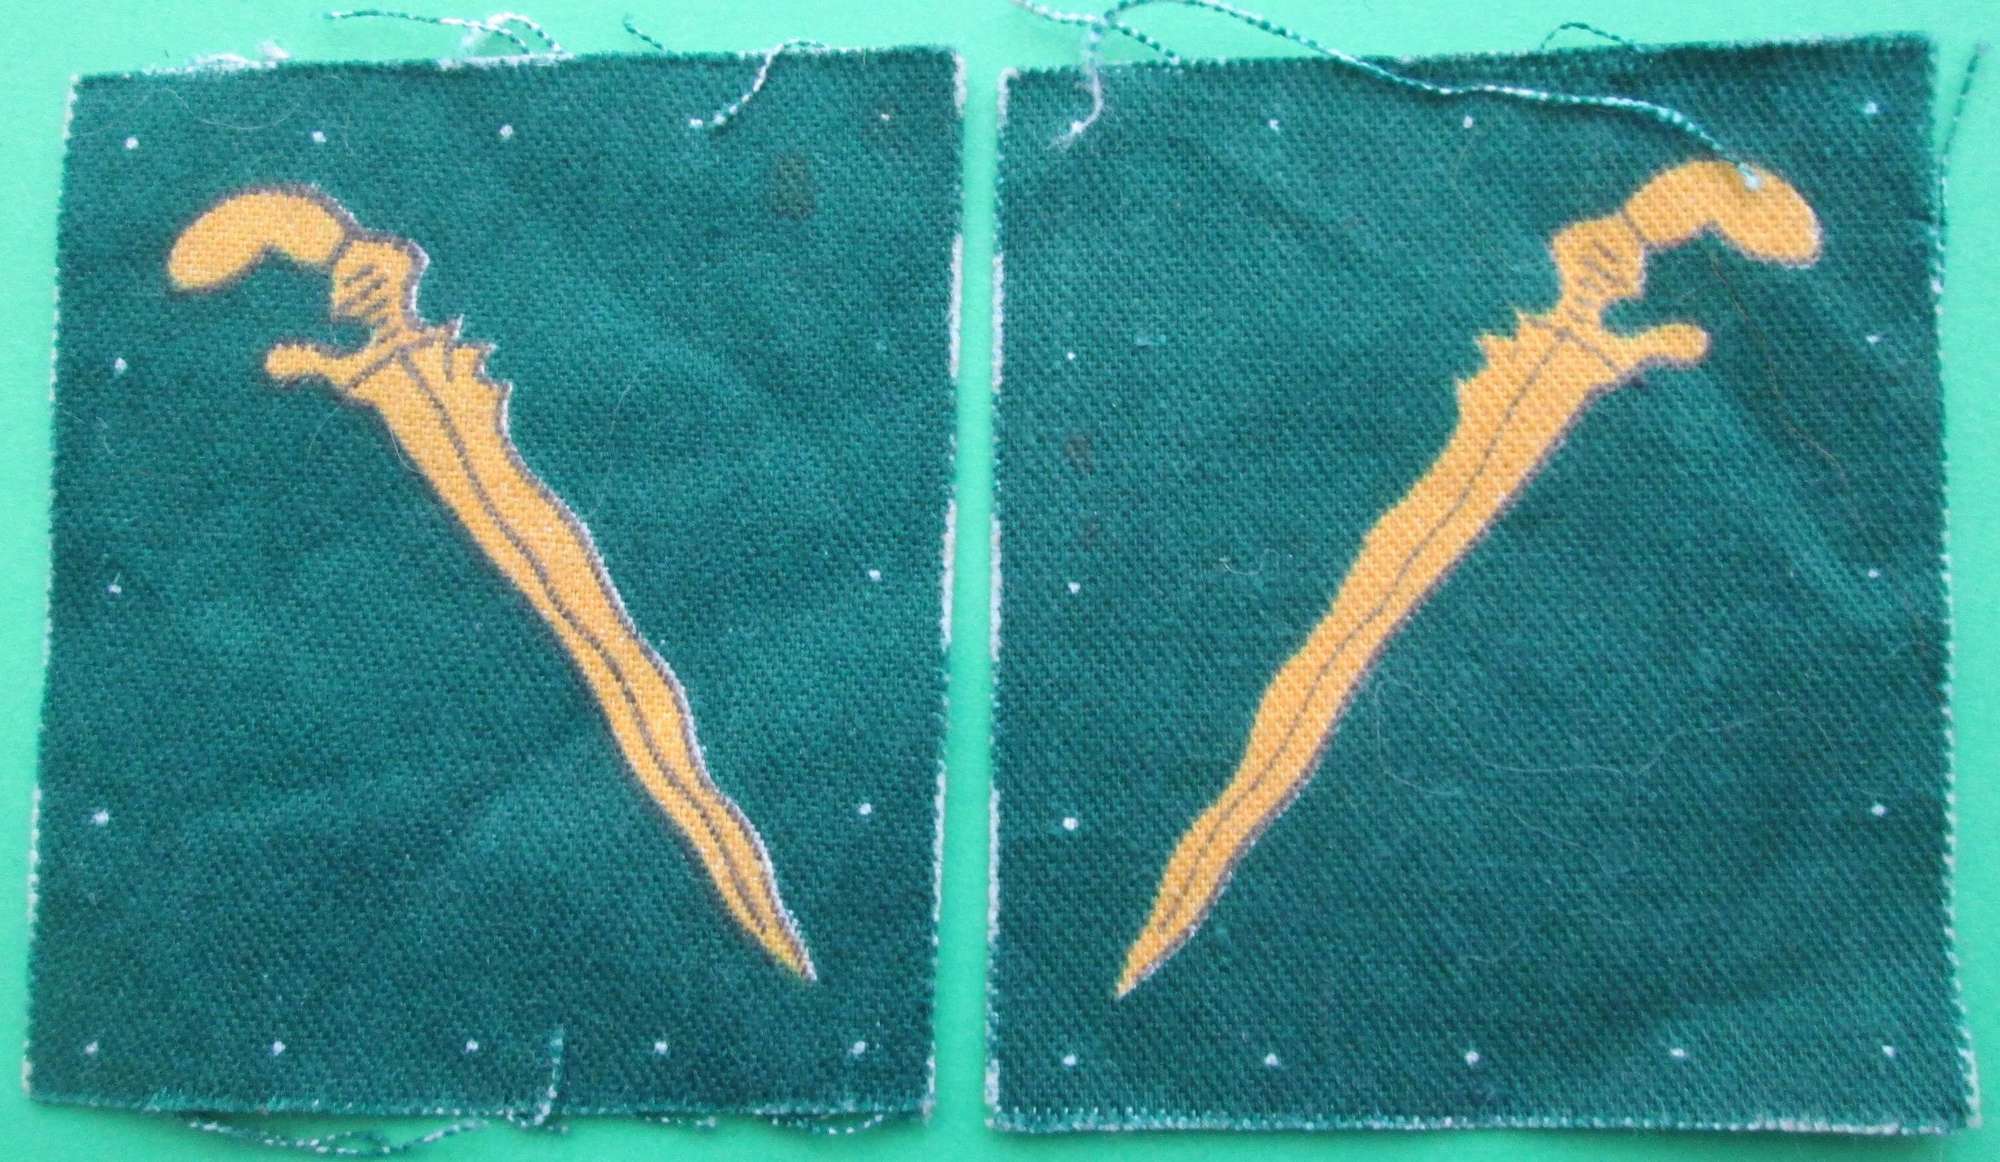 A PAIR OF UNCUT MALAYA COMMAND FORMATION SIGNS